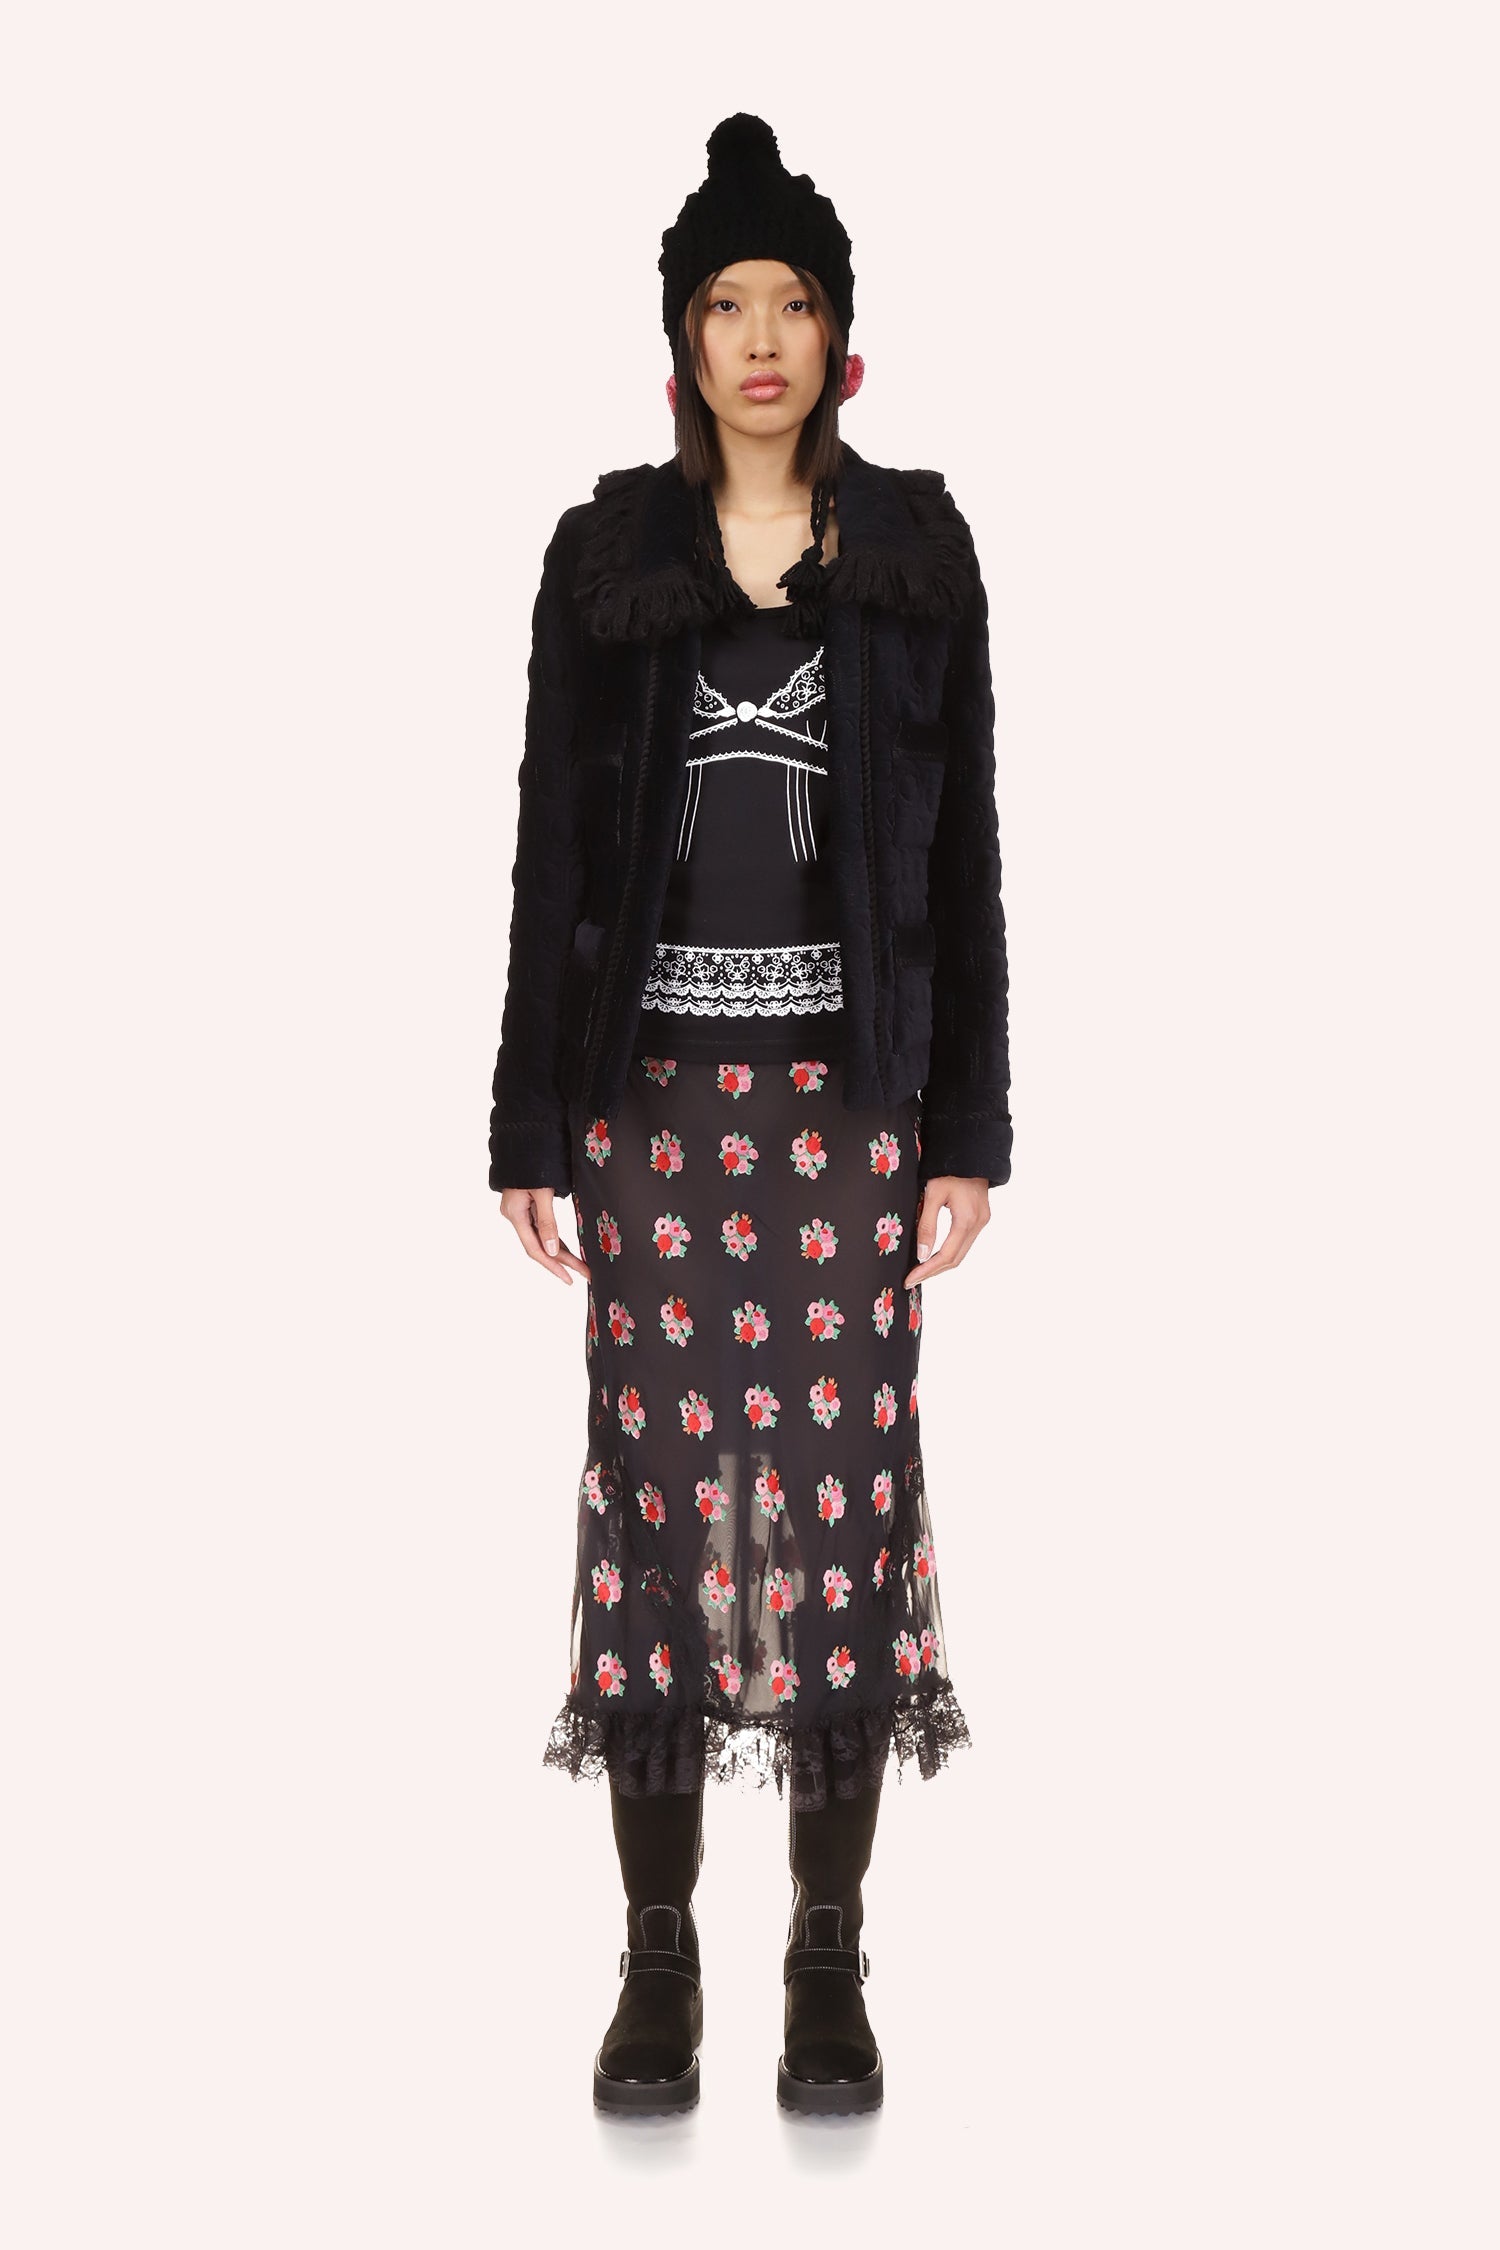 Black jacket, long-sleeves, large collar, 2-large pockets and shiny black opening and a repetitive, daisies-like pattern